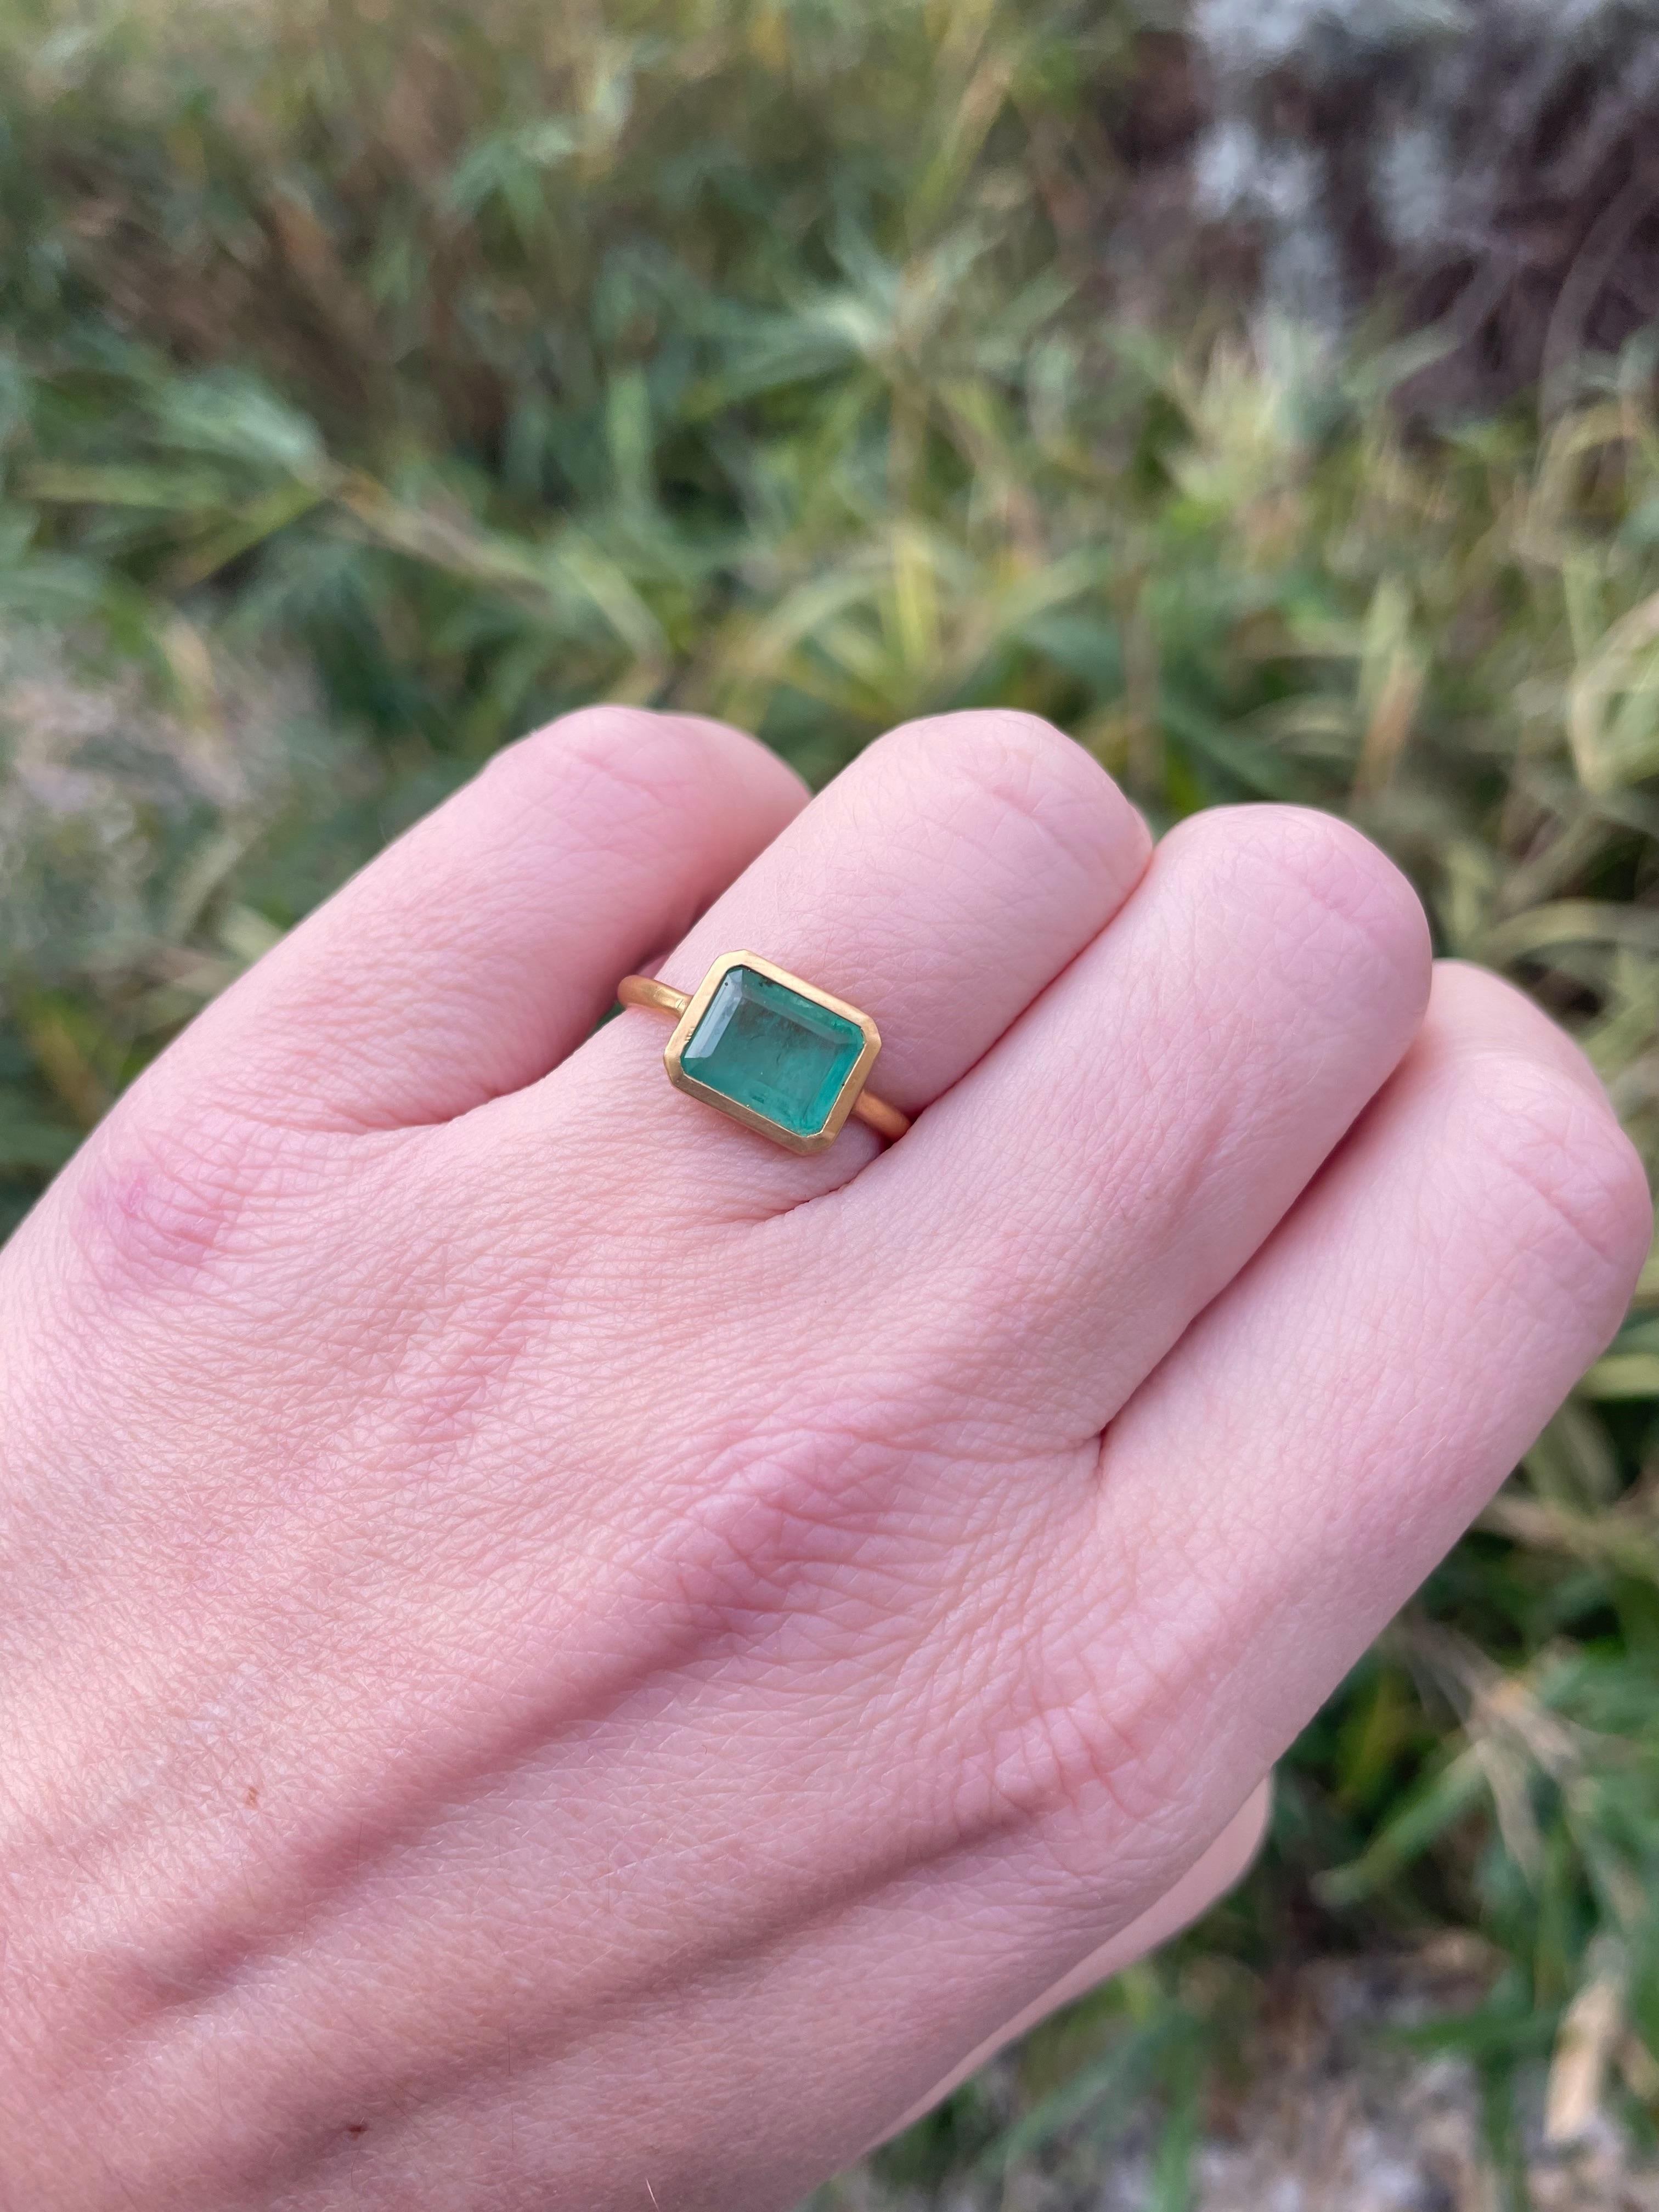 This simple ring by Scrives is composed of an emerald  in an rectangular emerald cut. 
The stone is set in a 22kt closed gold setting.
This emerald is natural, not treated and has natural & typical inclusions. 

This ring is handmade with 22kt mat